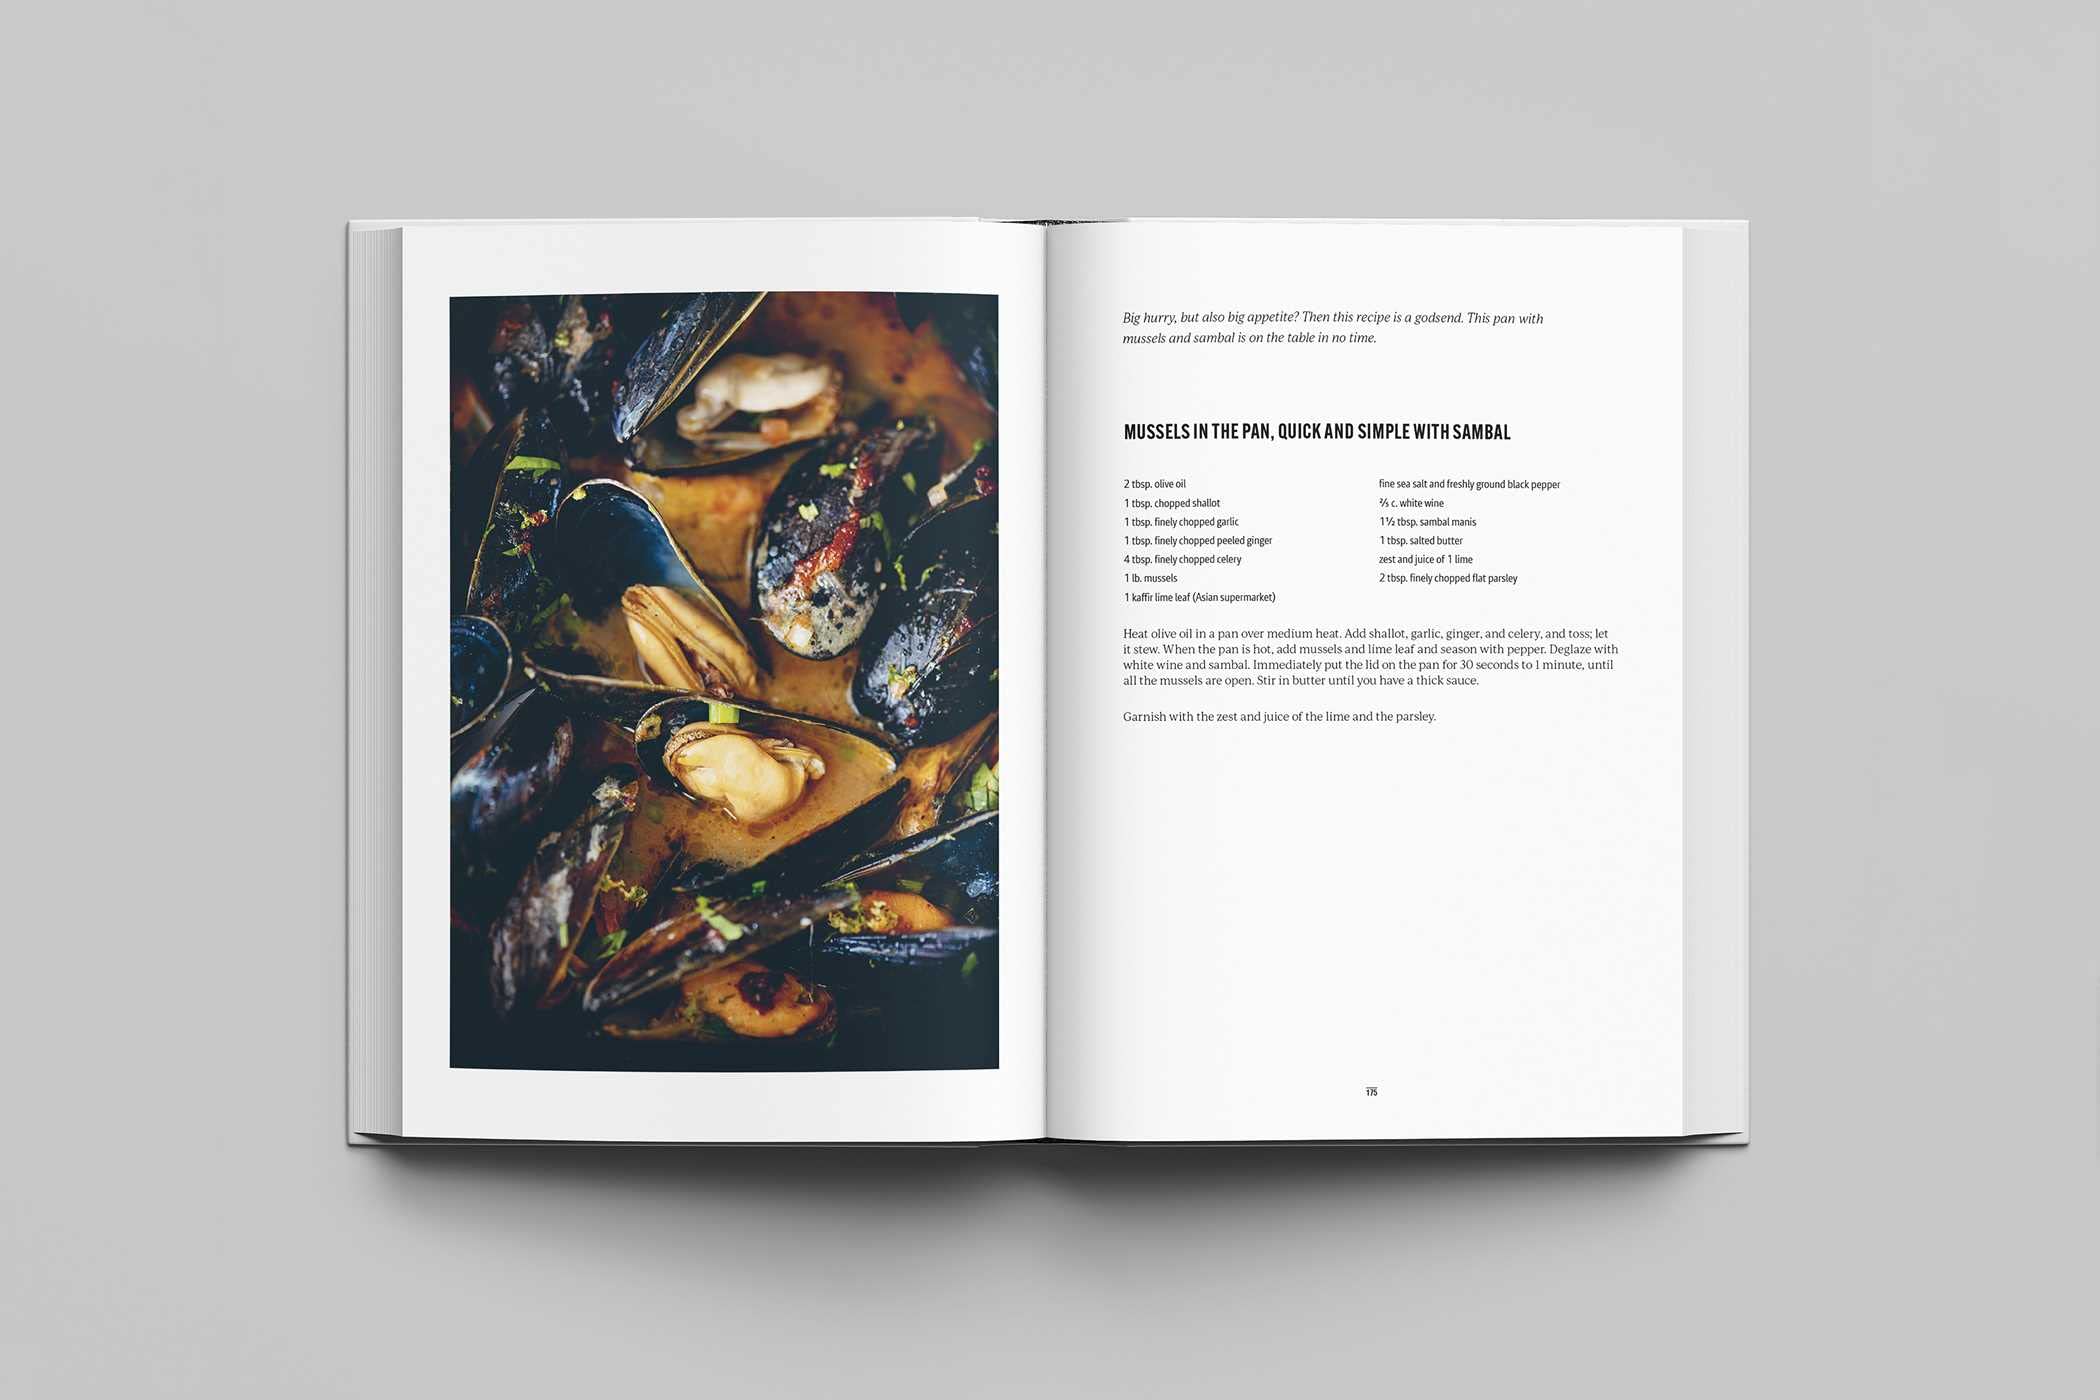 Mussels: An Homage in 50 Recipes (Sergio Herman)